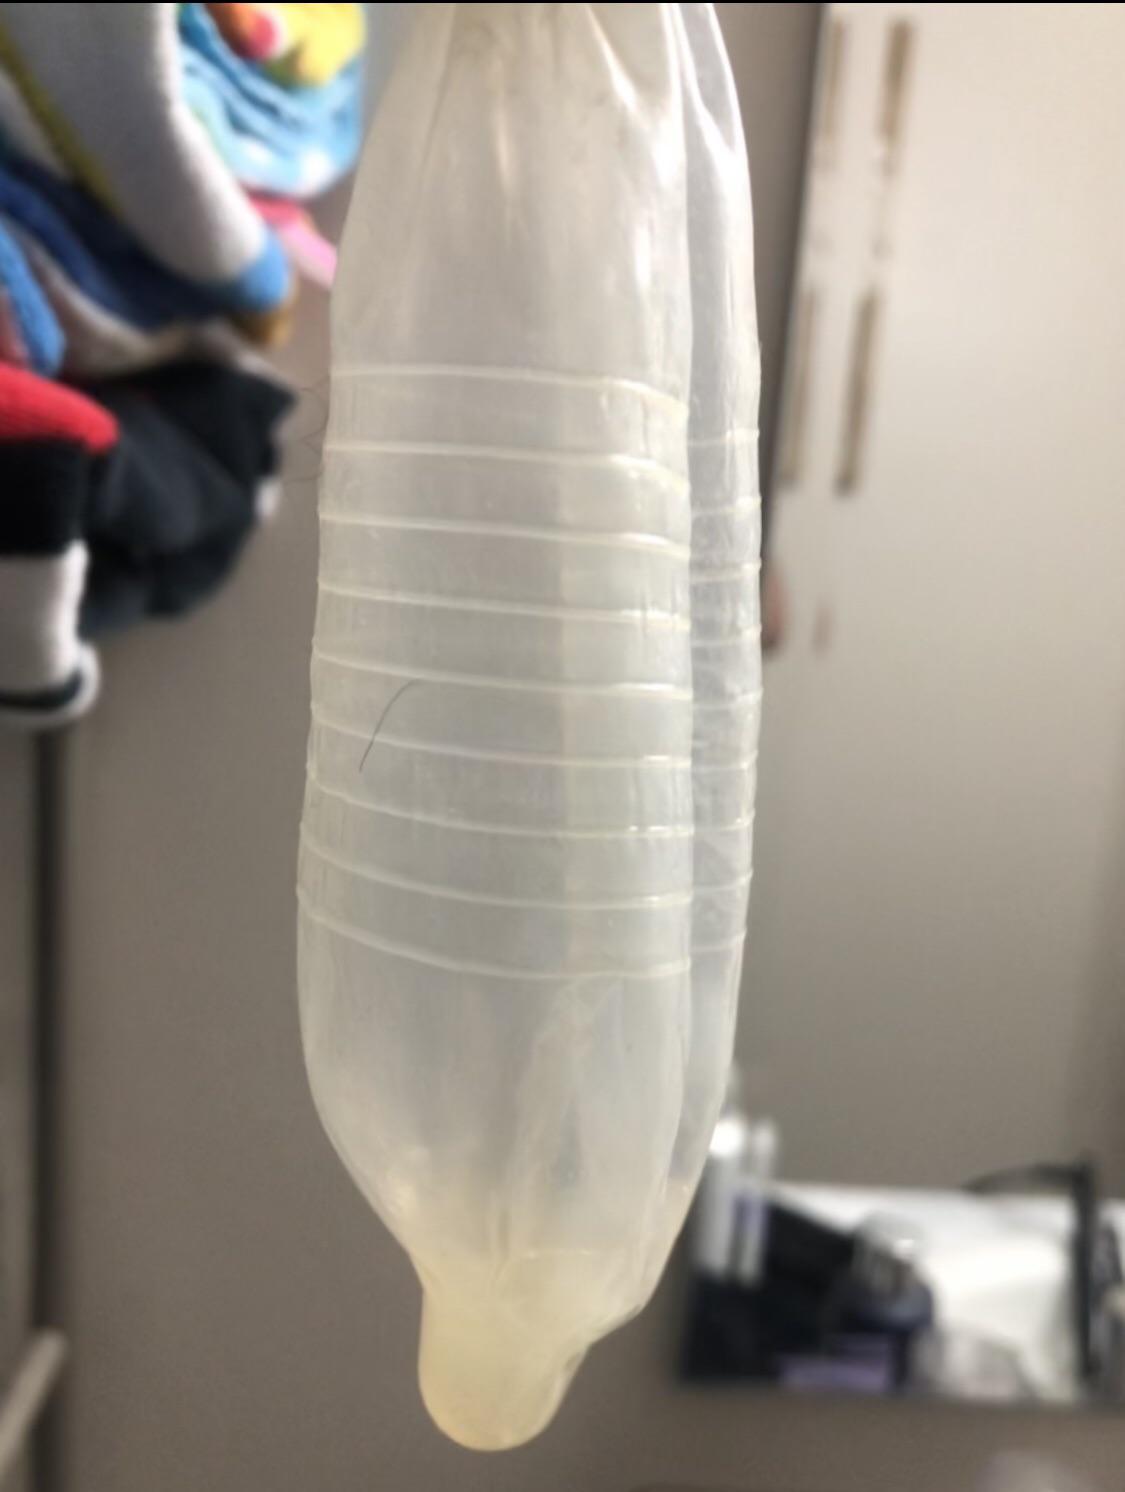 Found Brothers Used Condom Filled With Cum Scrolller